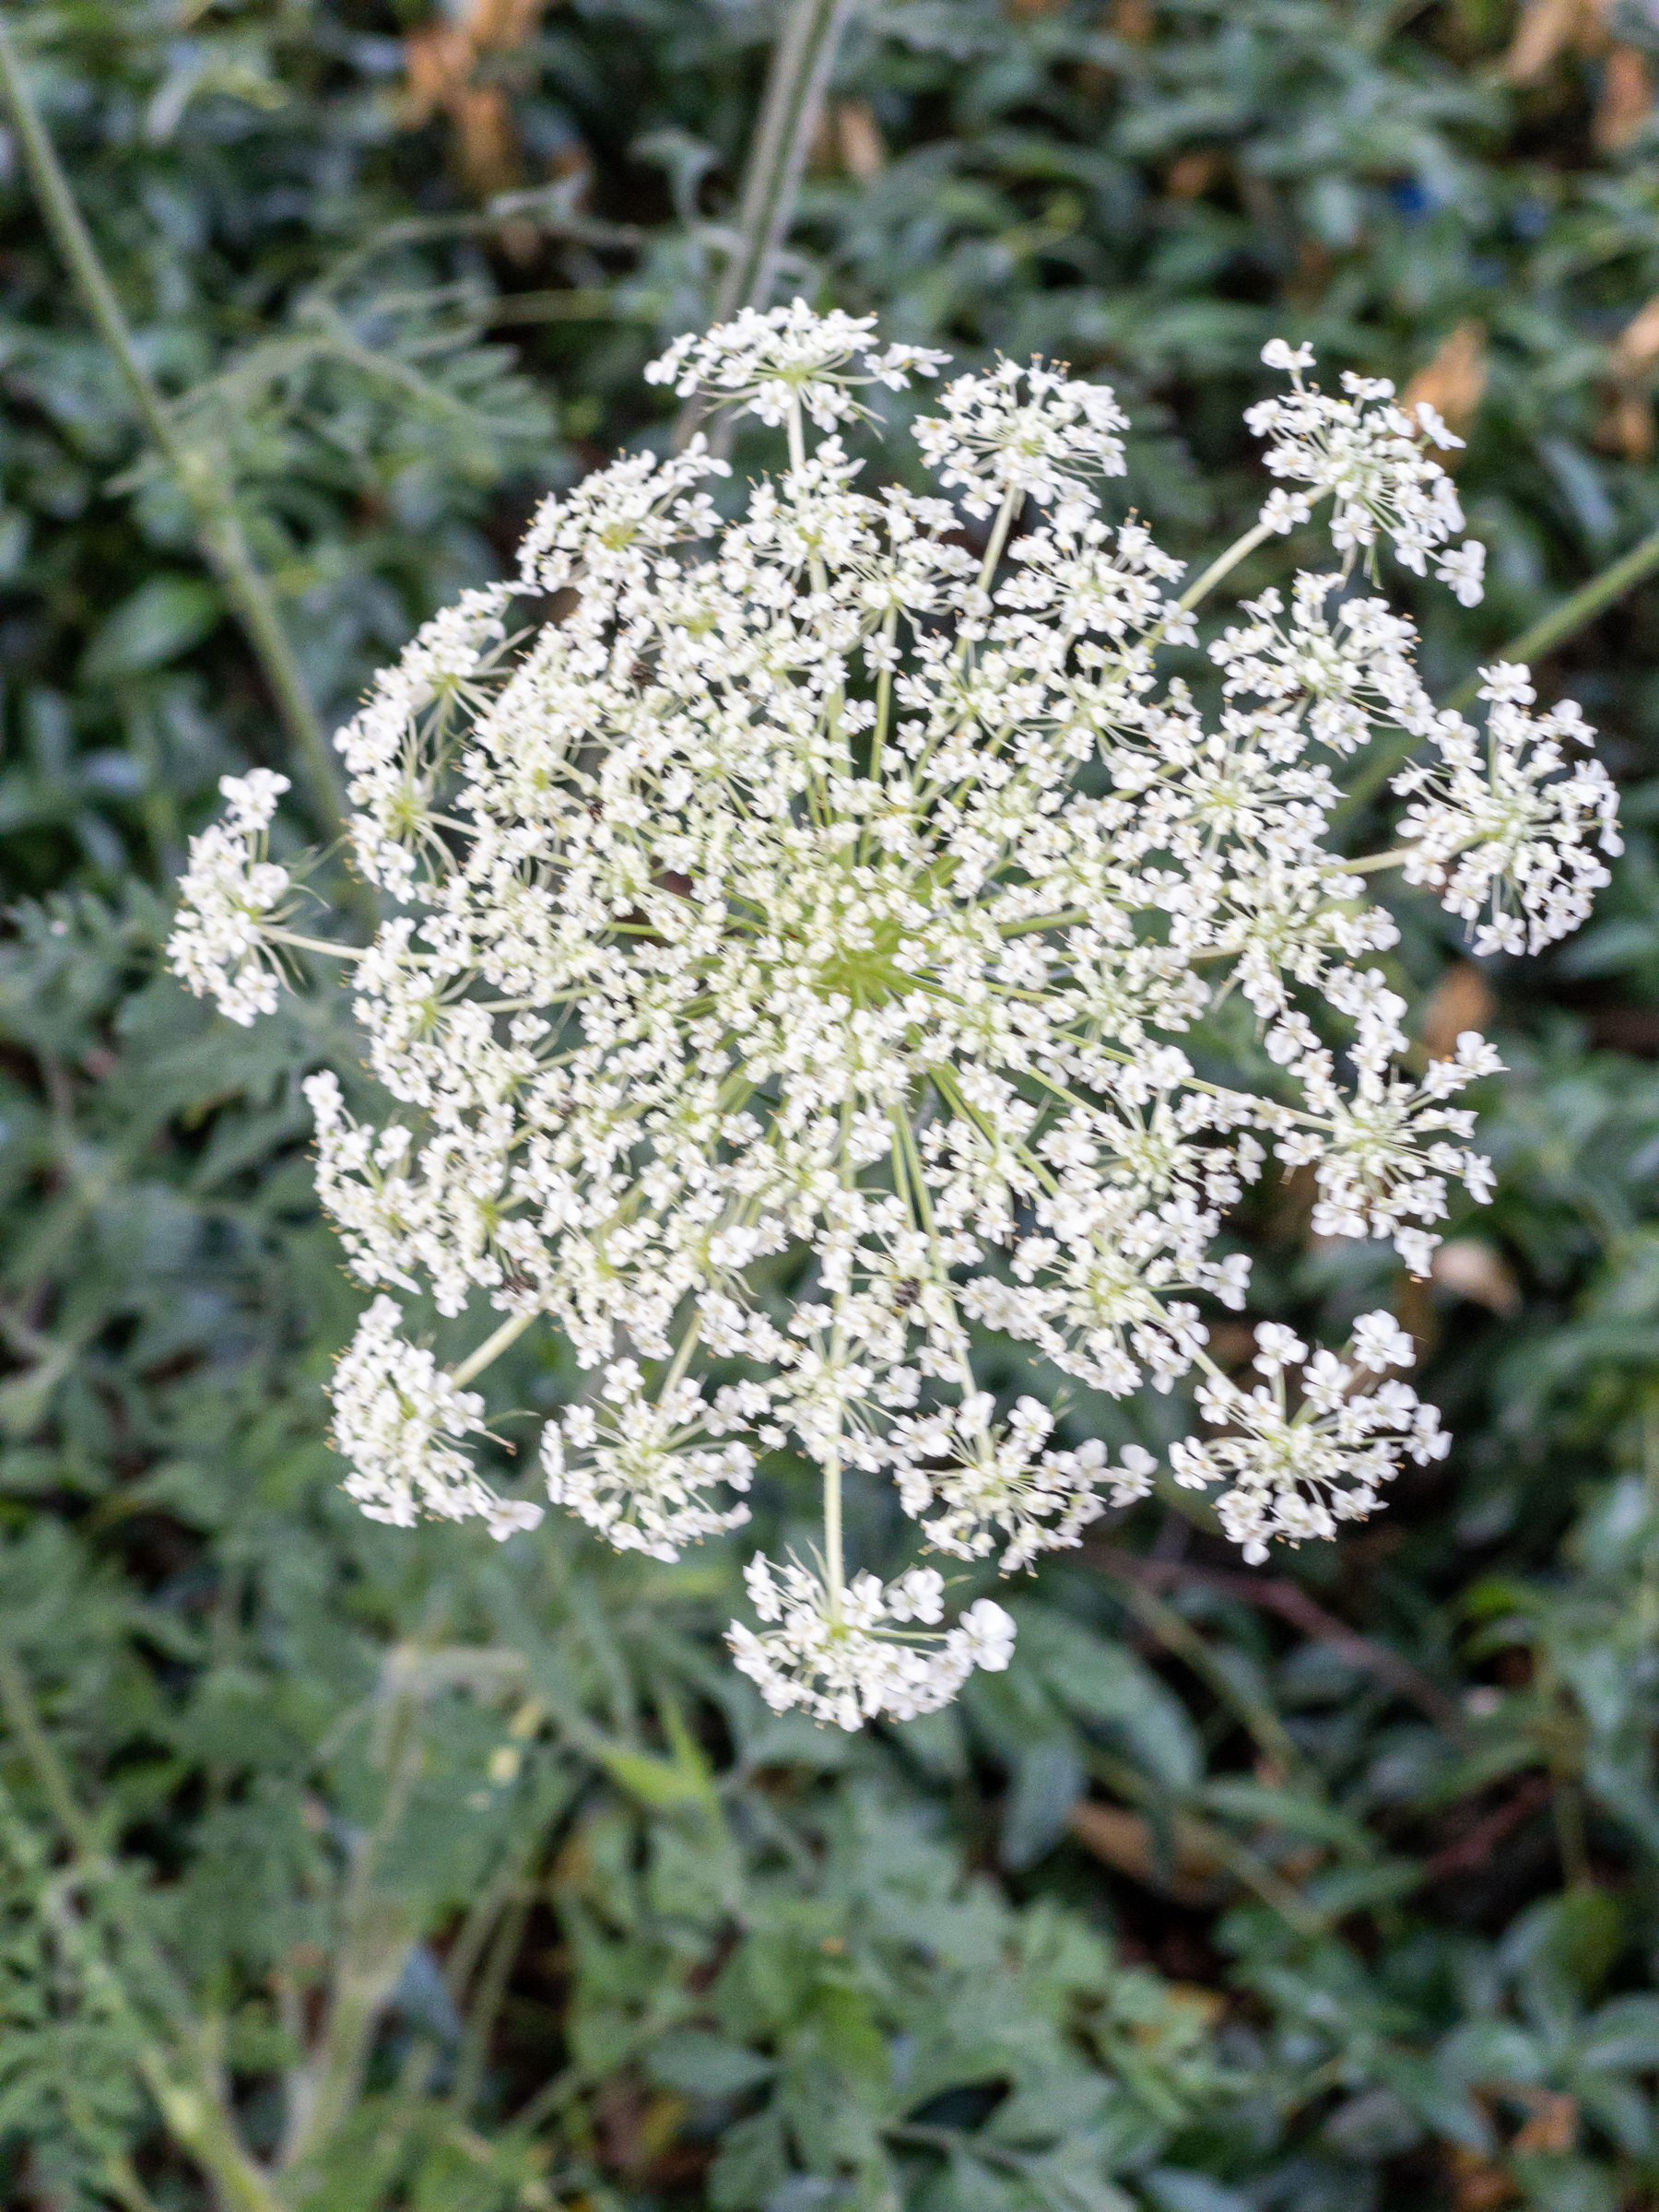 Queen Anne’s Lace blossom.